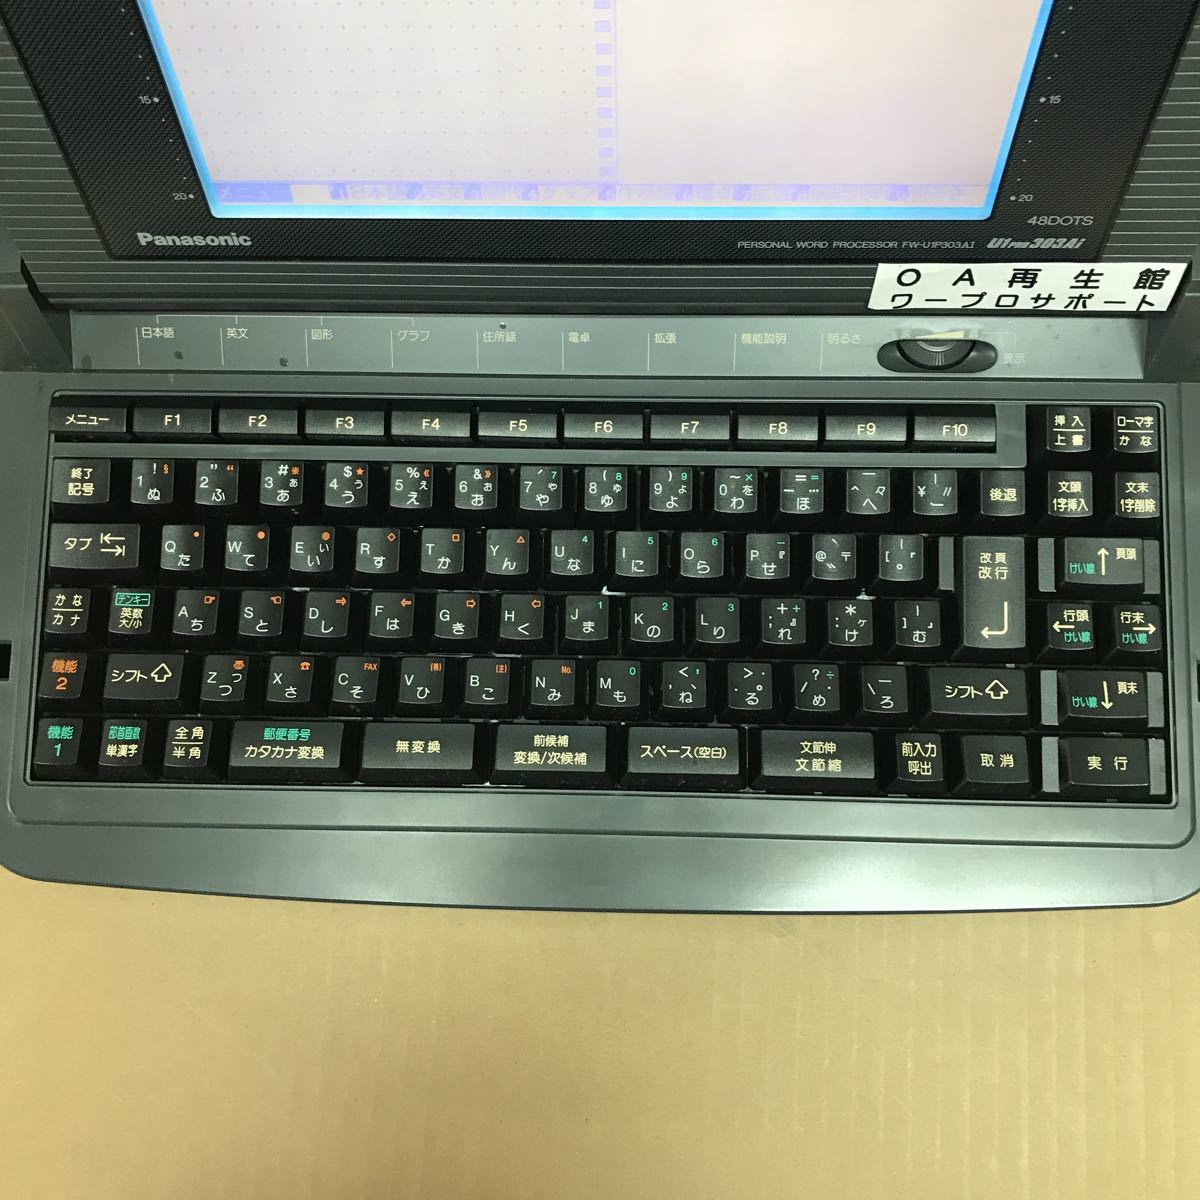 K2224 Panasonic word-processor FW-U1P303AI service being completed 3 months guarantee equipped 